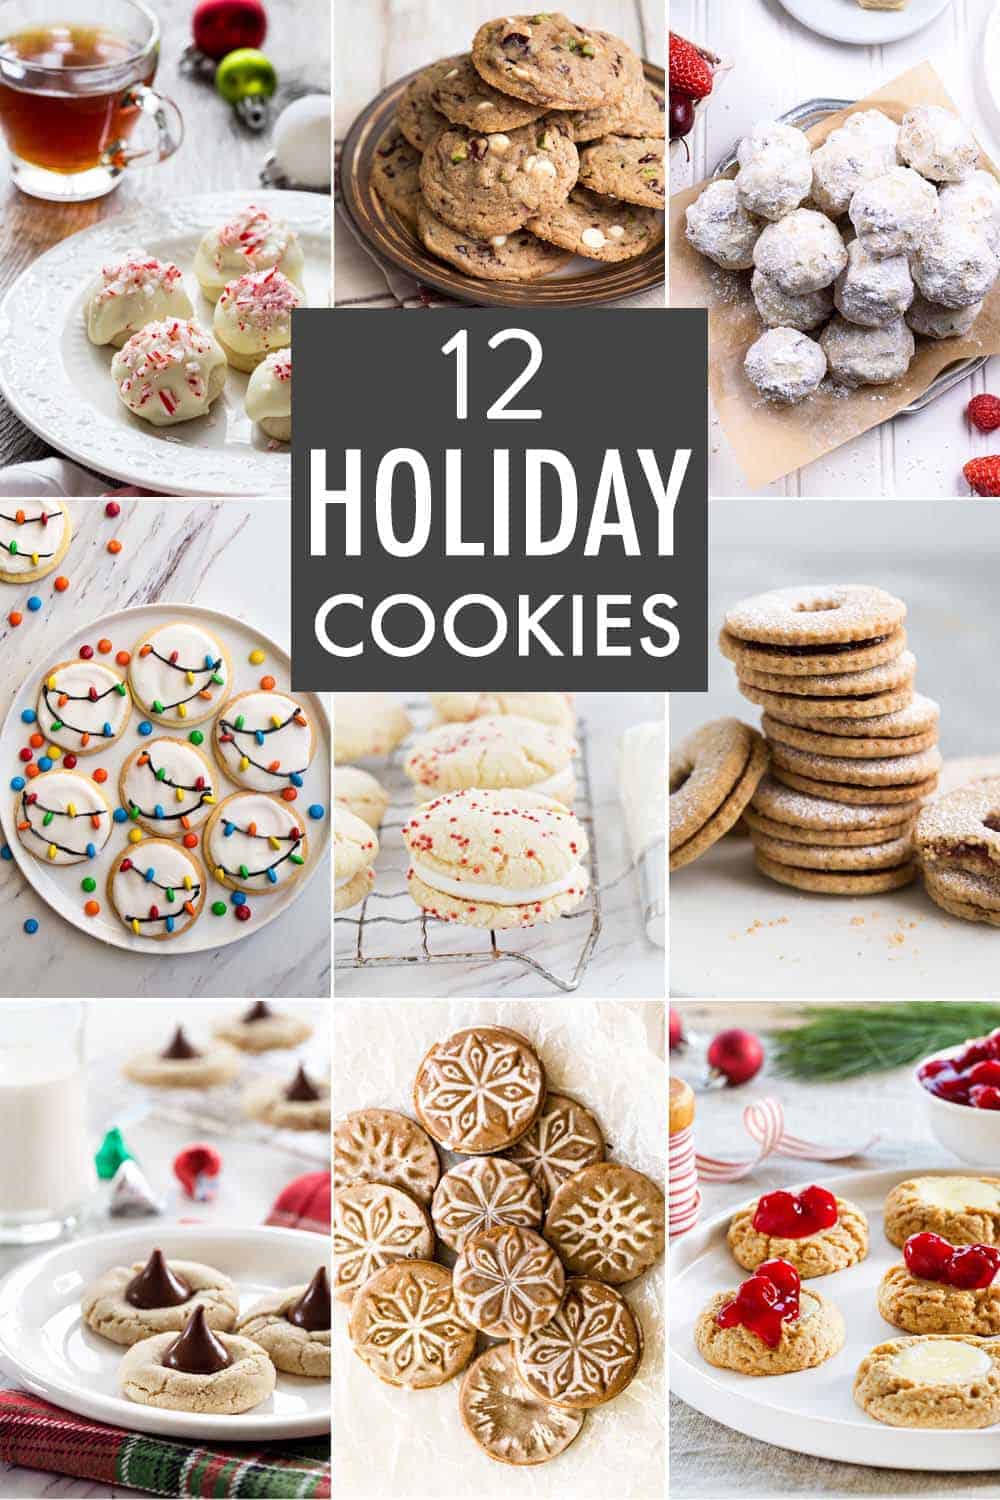 12 Holiday Cookies Roundup